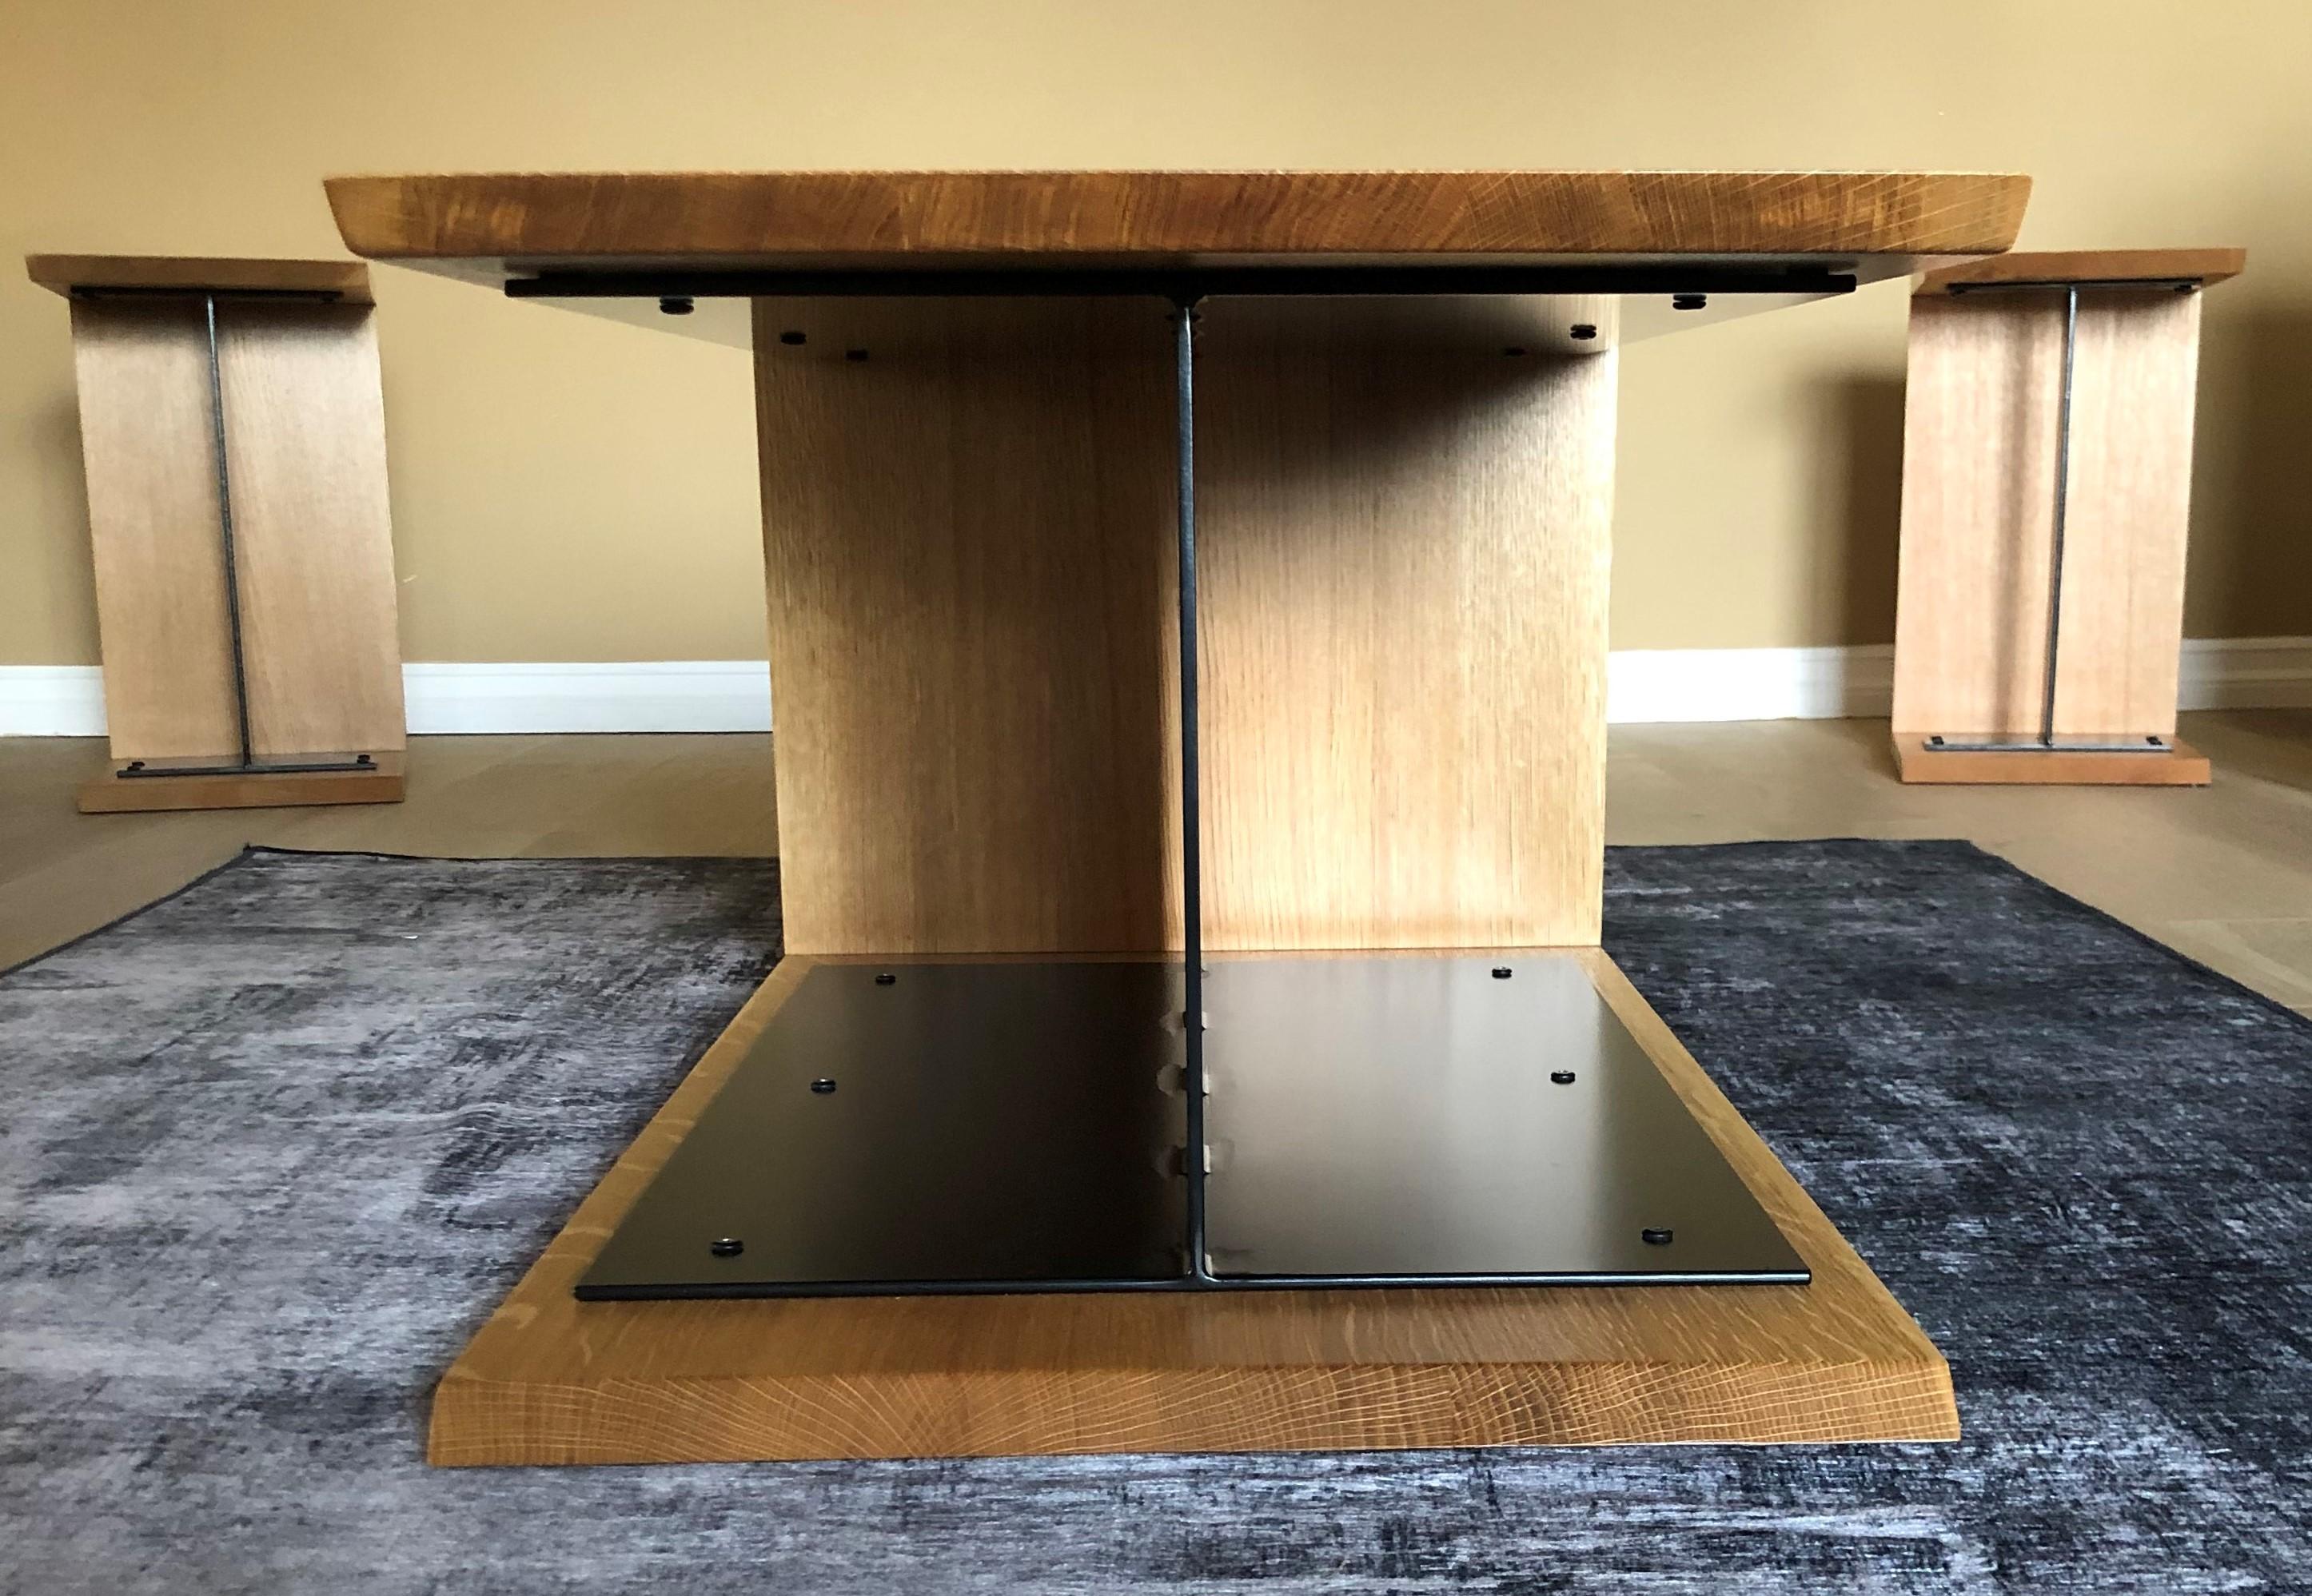 This coffee table from Carlo Stenta’s I-beam & oak table collection seamlessly unites industrial with modern. The utilitarian I-beam support is custom fabricated of ½” thick solid steel plate. Flawlessly welded and delicately refined in a black